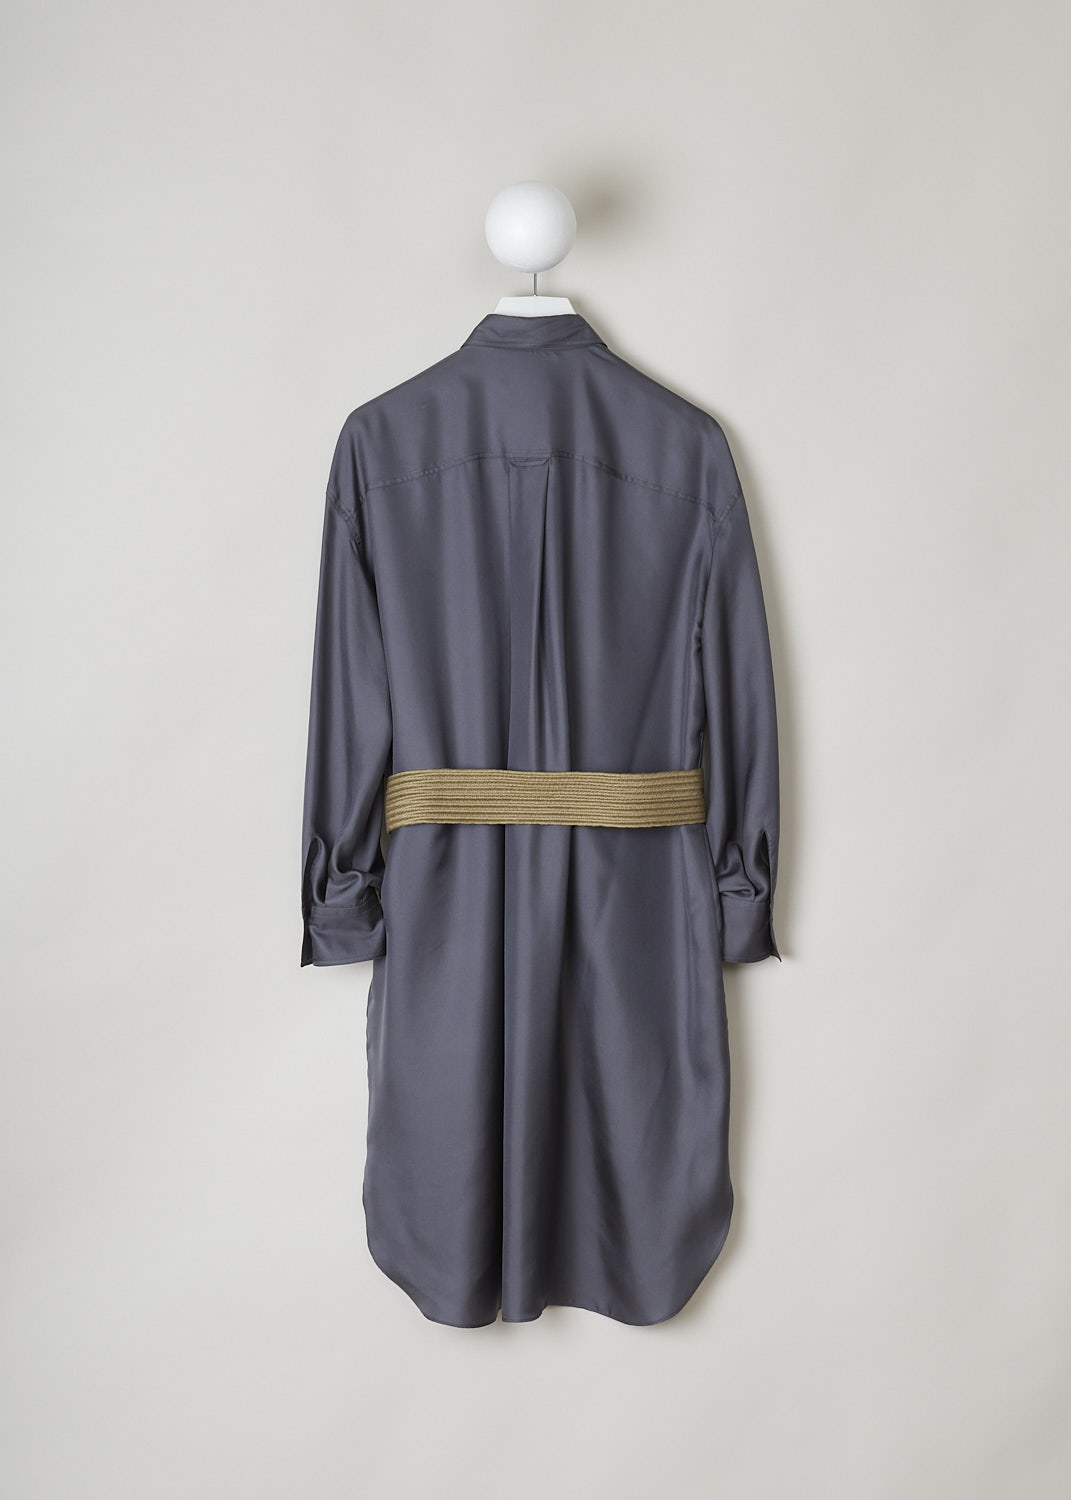 BRUNELLO CUCINELLI, ANTHRACITE SHIRT DRESS WITH BRAIDED BELT, MB953MY306_C079, Grey, Back, This wide anthracite shirt dress has a classic collar a front button closure. The long sleeves have buttoned cuffs. The dress has four stitched on pockets: two monili decorated breast pockets with flap and two slanted patch pockets. The dress has a rounded hemline with an asymmetrical finish, meaning the back is a little longer than the front. The dress comes with braided belt.
